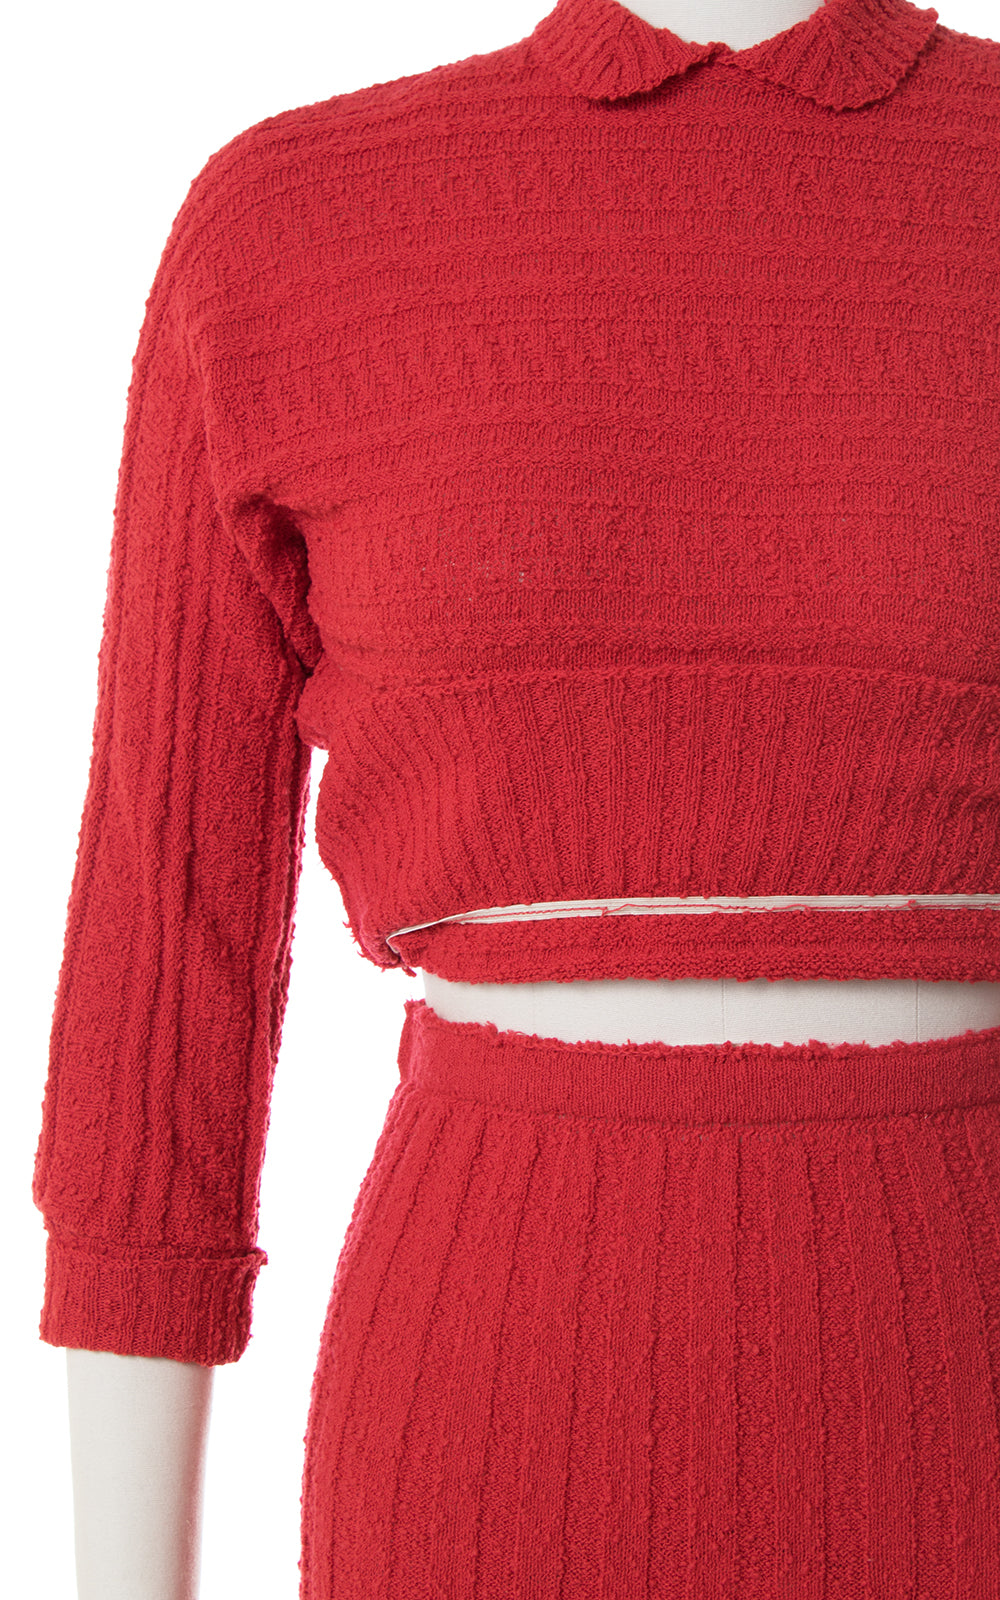 1950s Red Knit Wool Sweater + Skirt Set